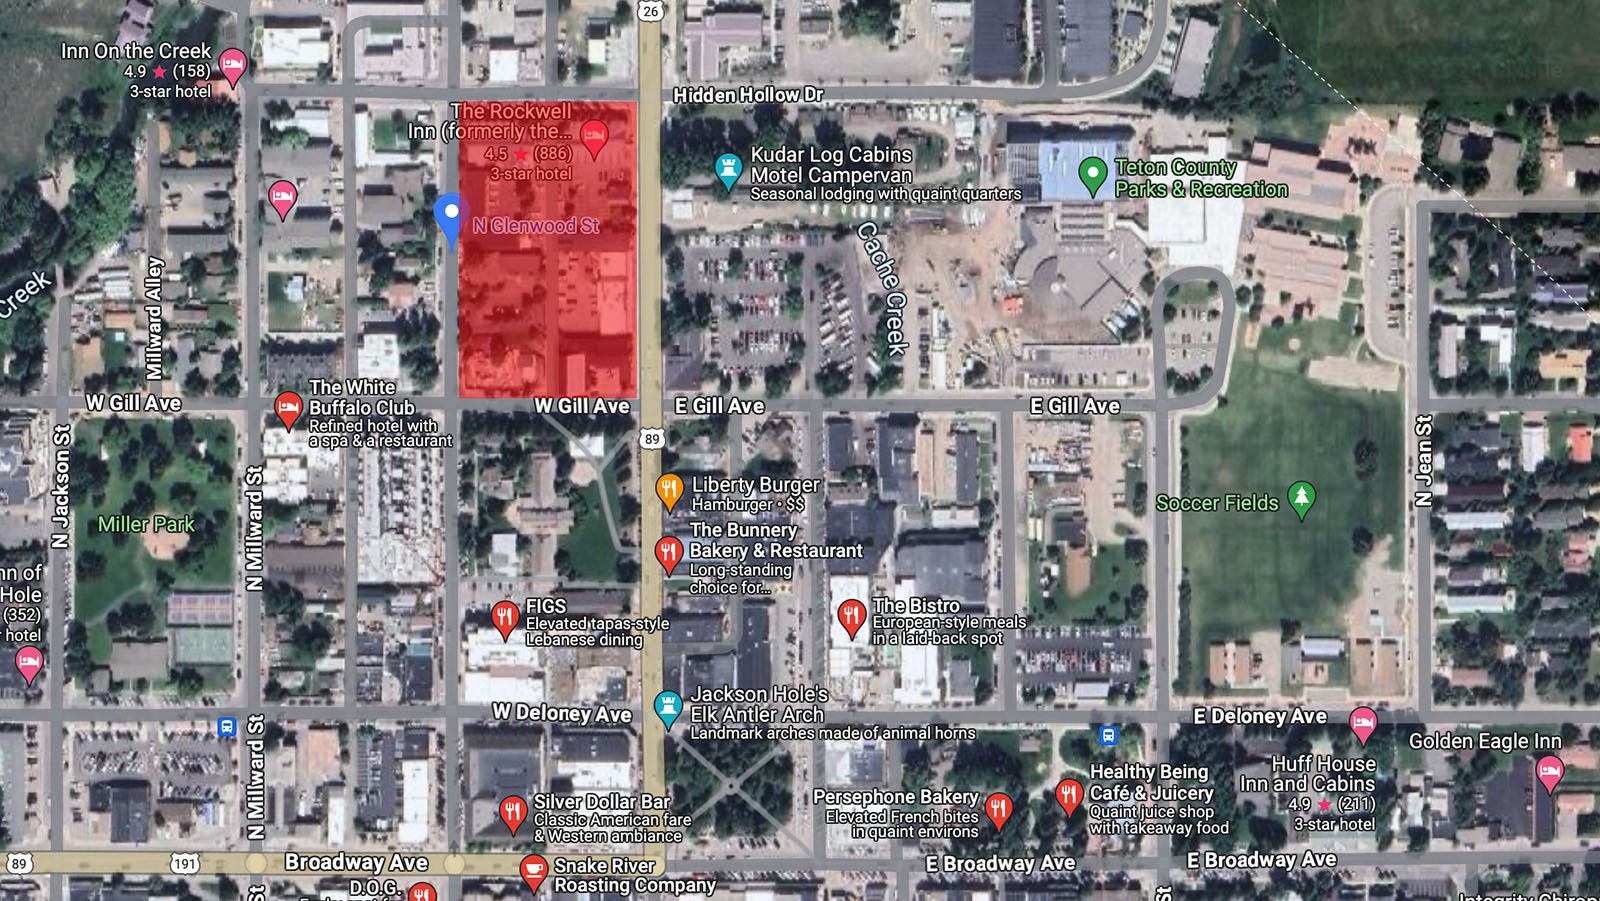 The shaded area shows the city block in downtown Jackson where Mogul Capital wants to build a massive hotel complex.